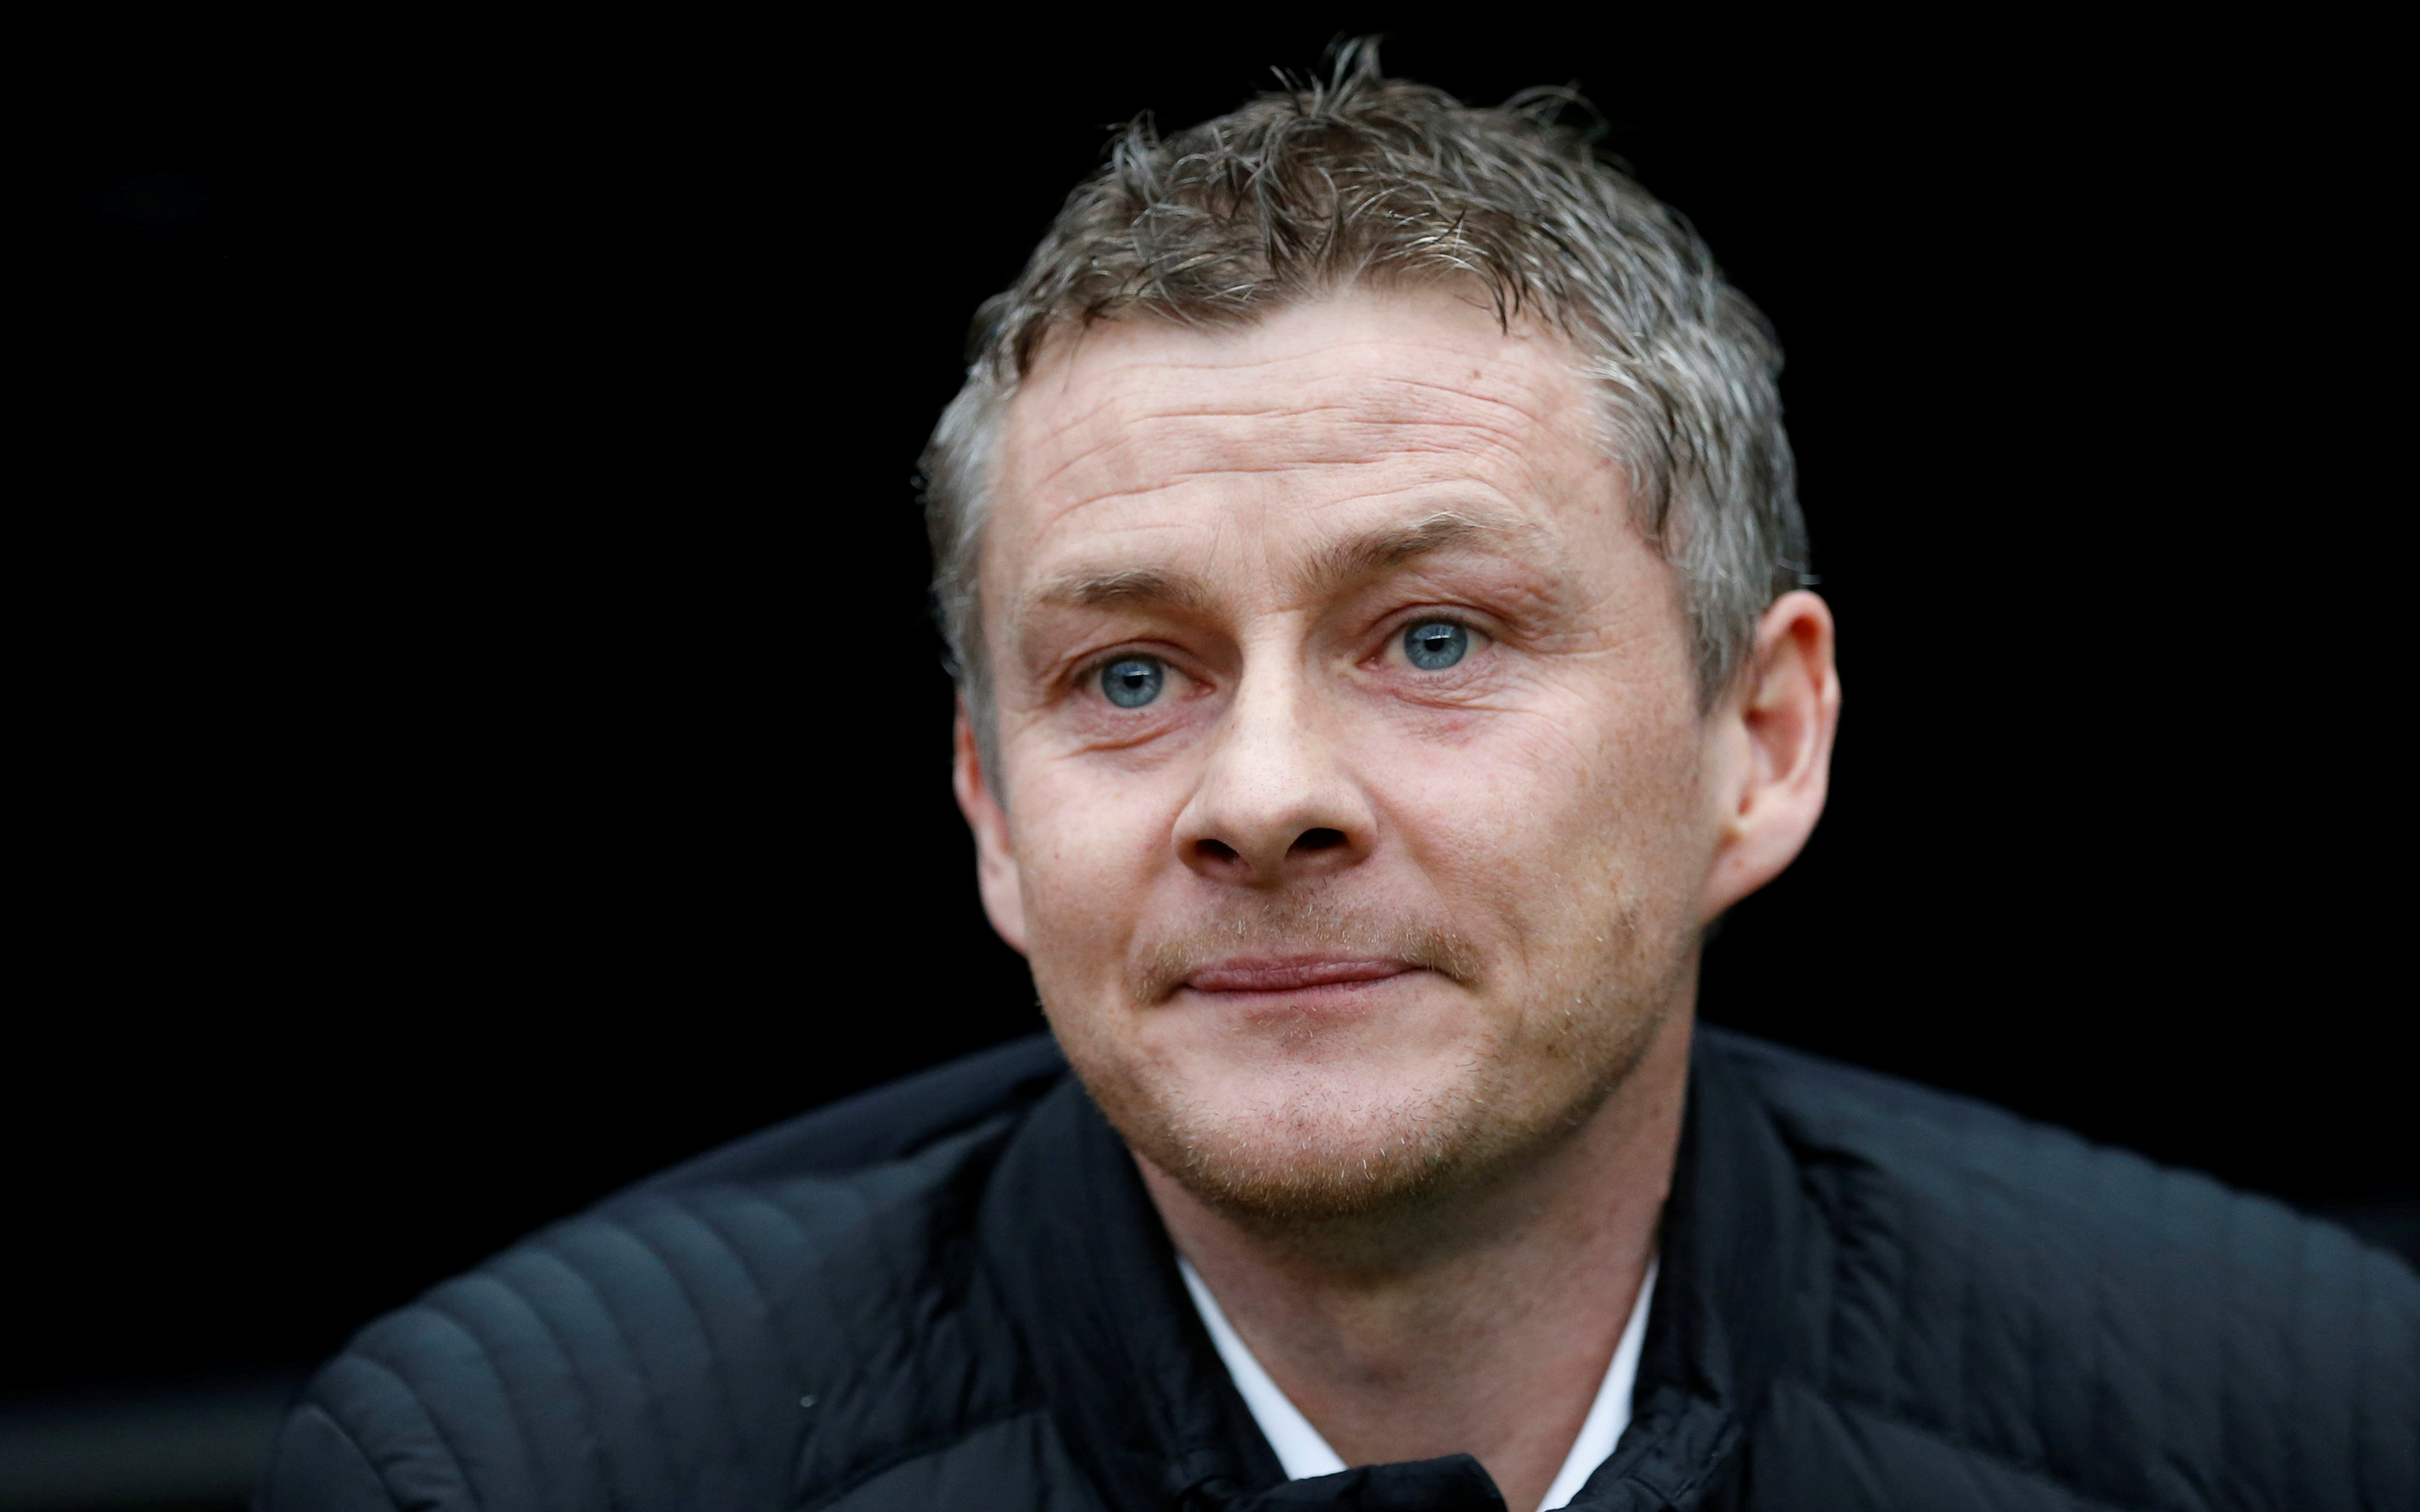 FILE PHOTO: Then Cardiff City manager Ole Gunnar Solskjaer takes his seat before their English FA Cup soccer match against Newcastle United at St. James' Park stadium in Newcastle, northern England January 4, 2014. REUTERS/Russell Cheyne/File Photo